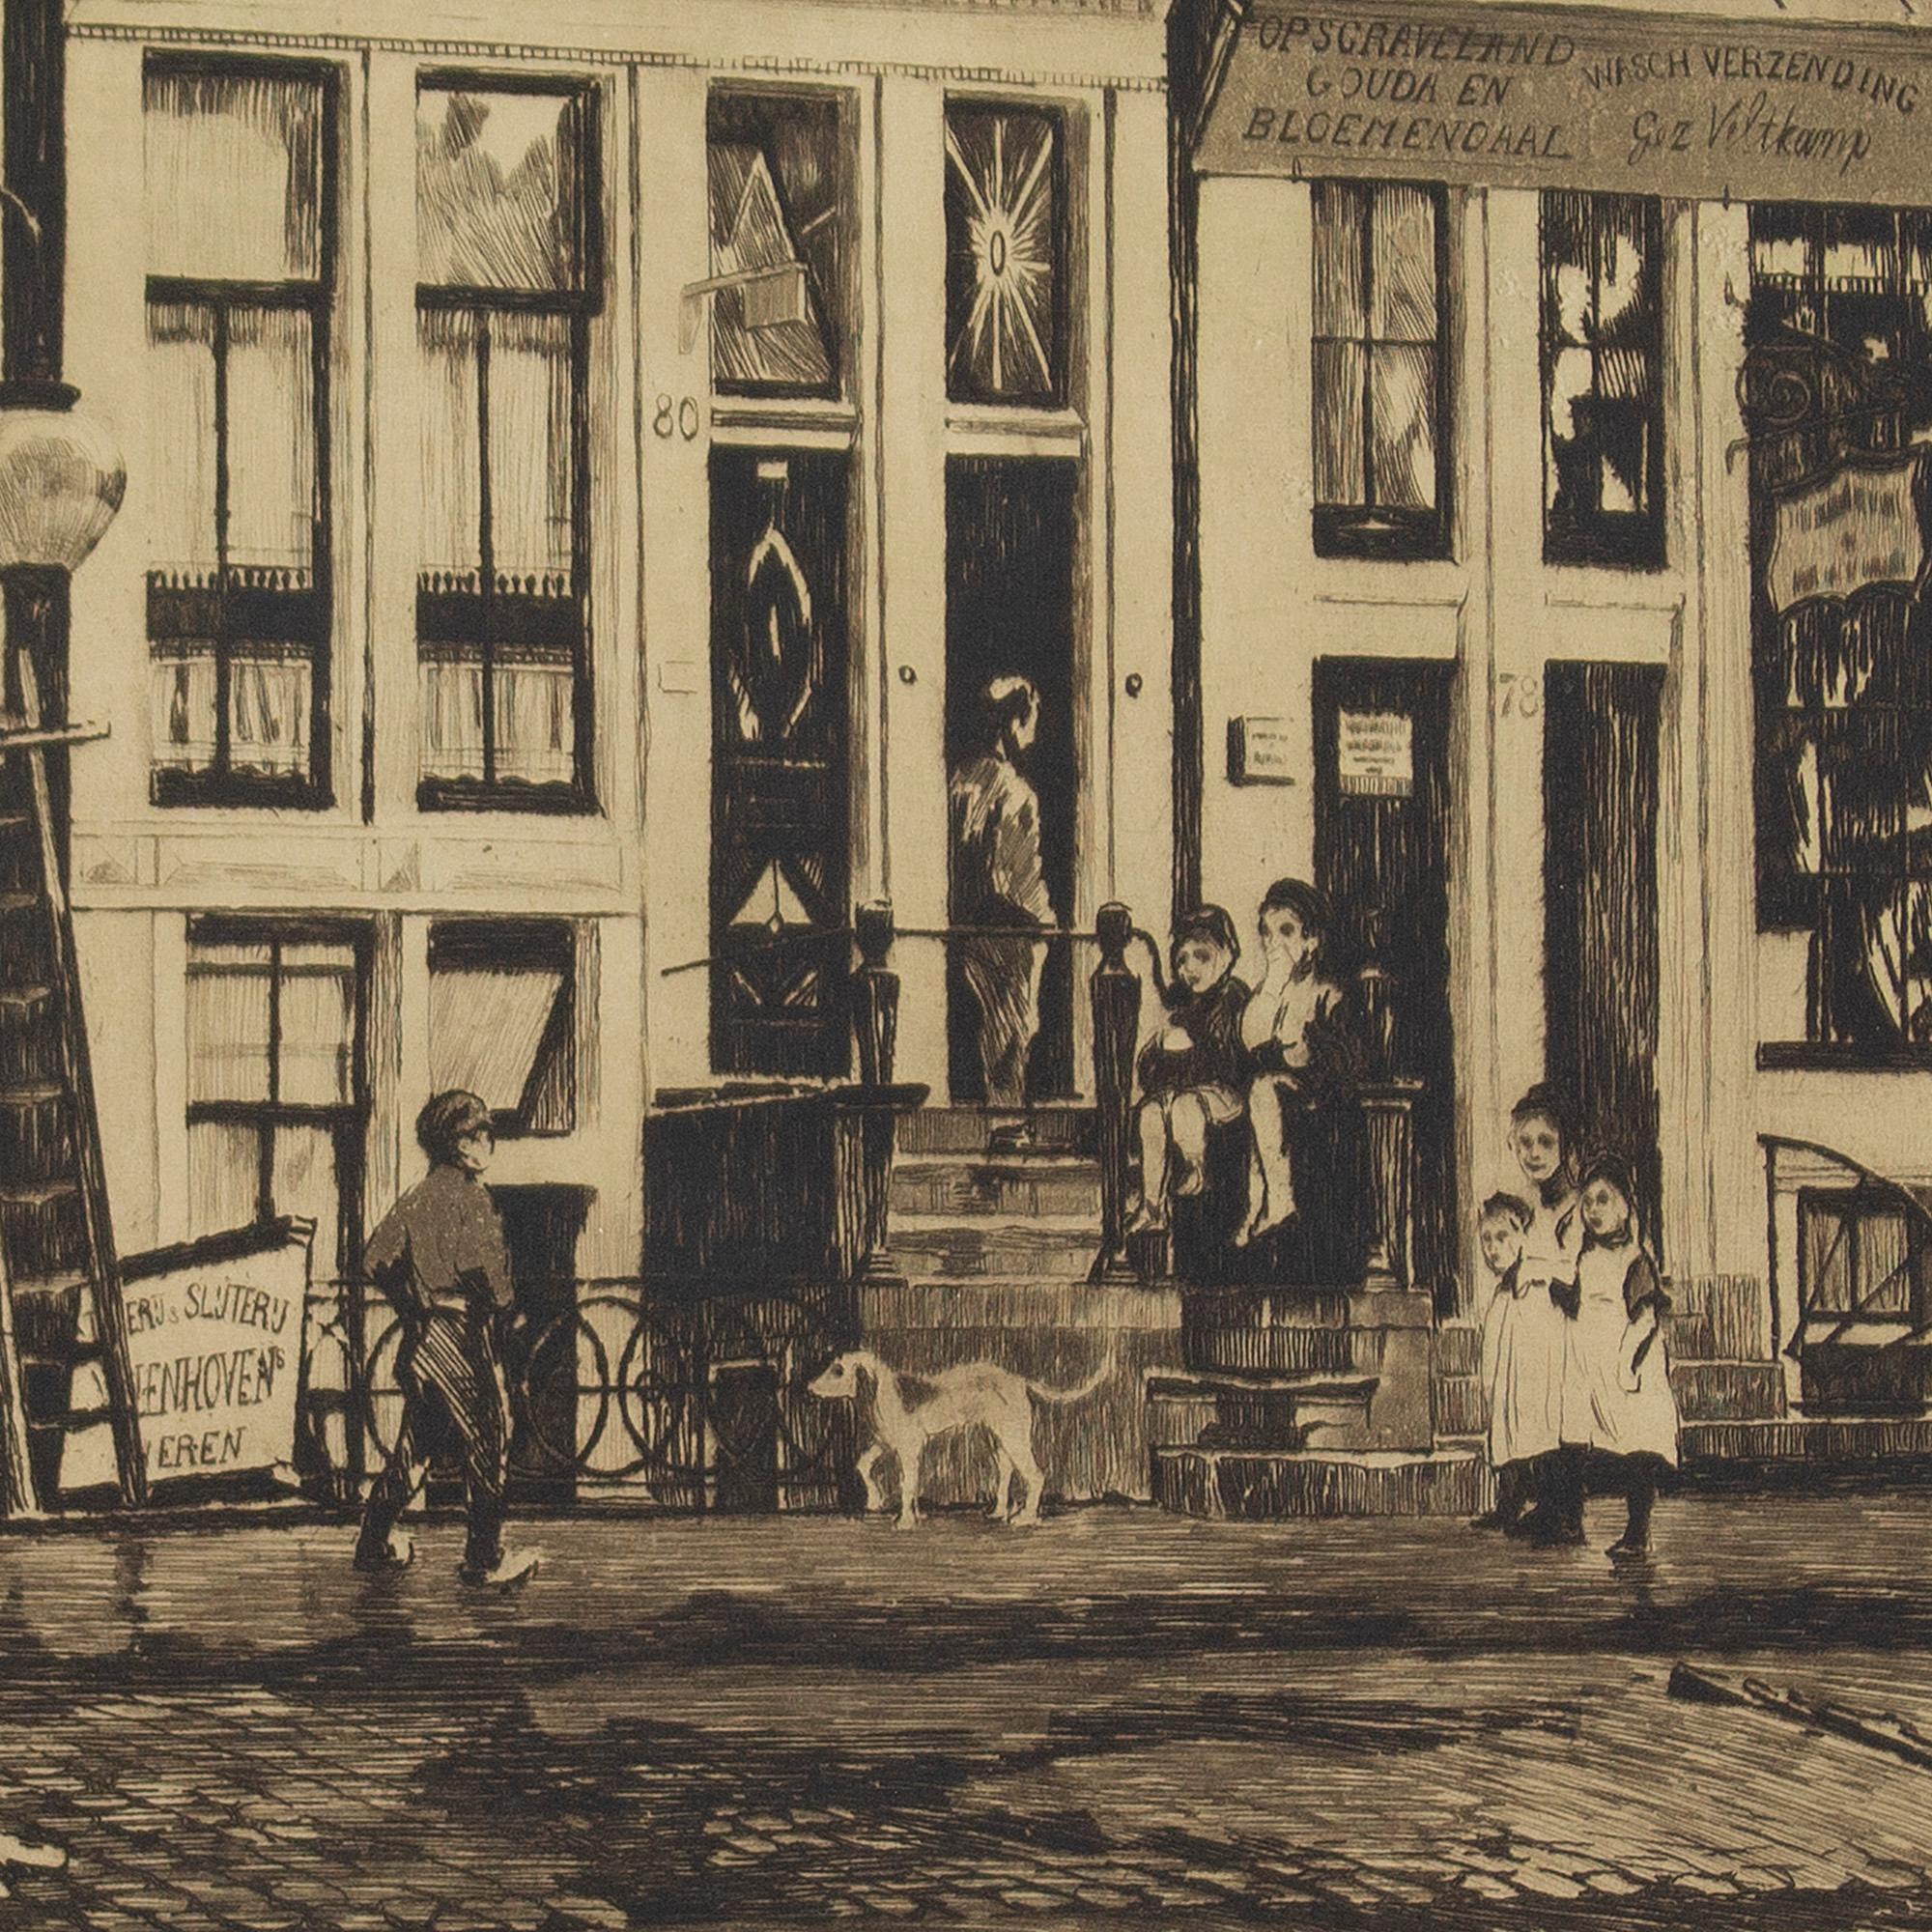 Willem Witsen, Oude Waal, Amsterdam, Etching 3